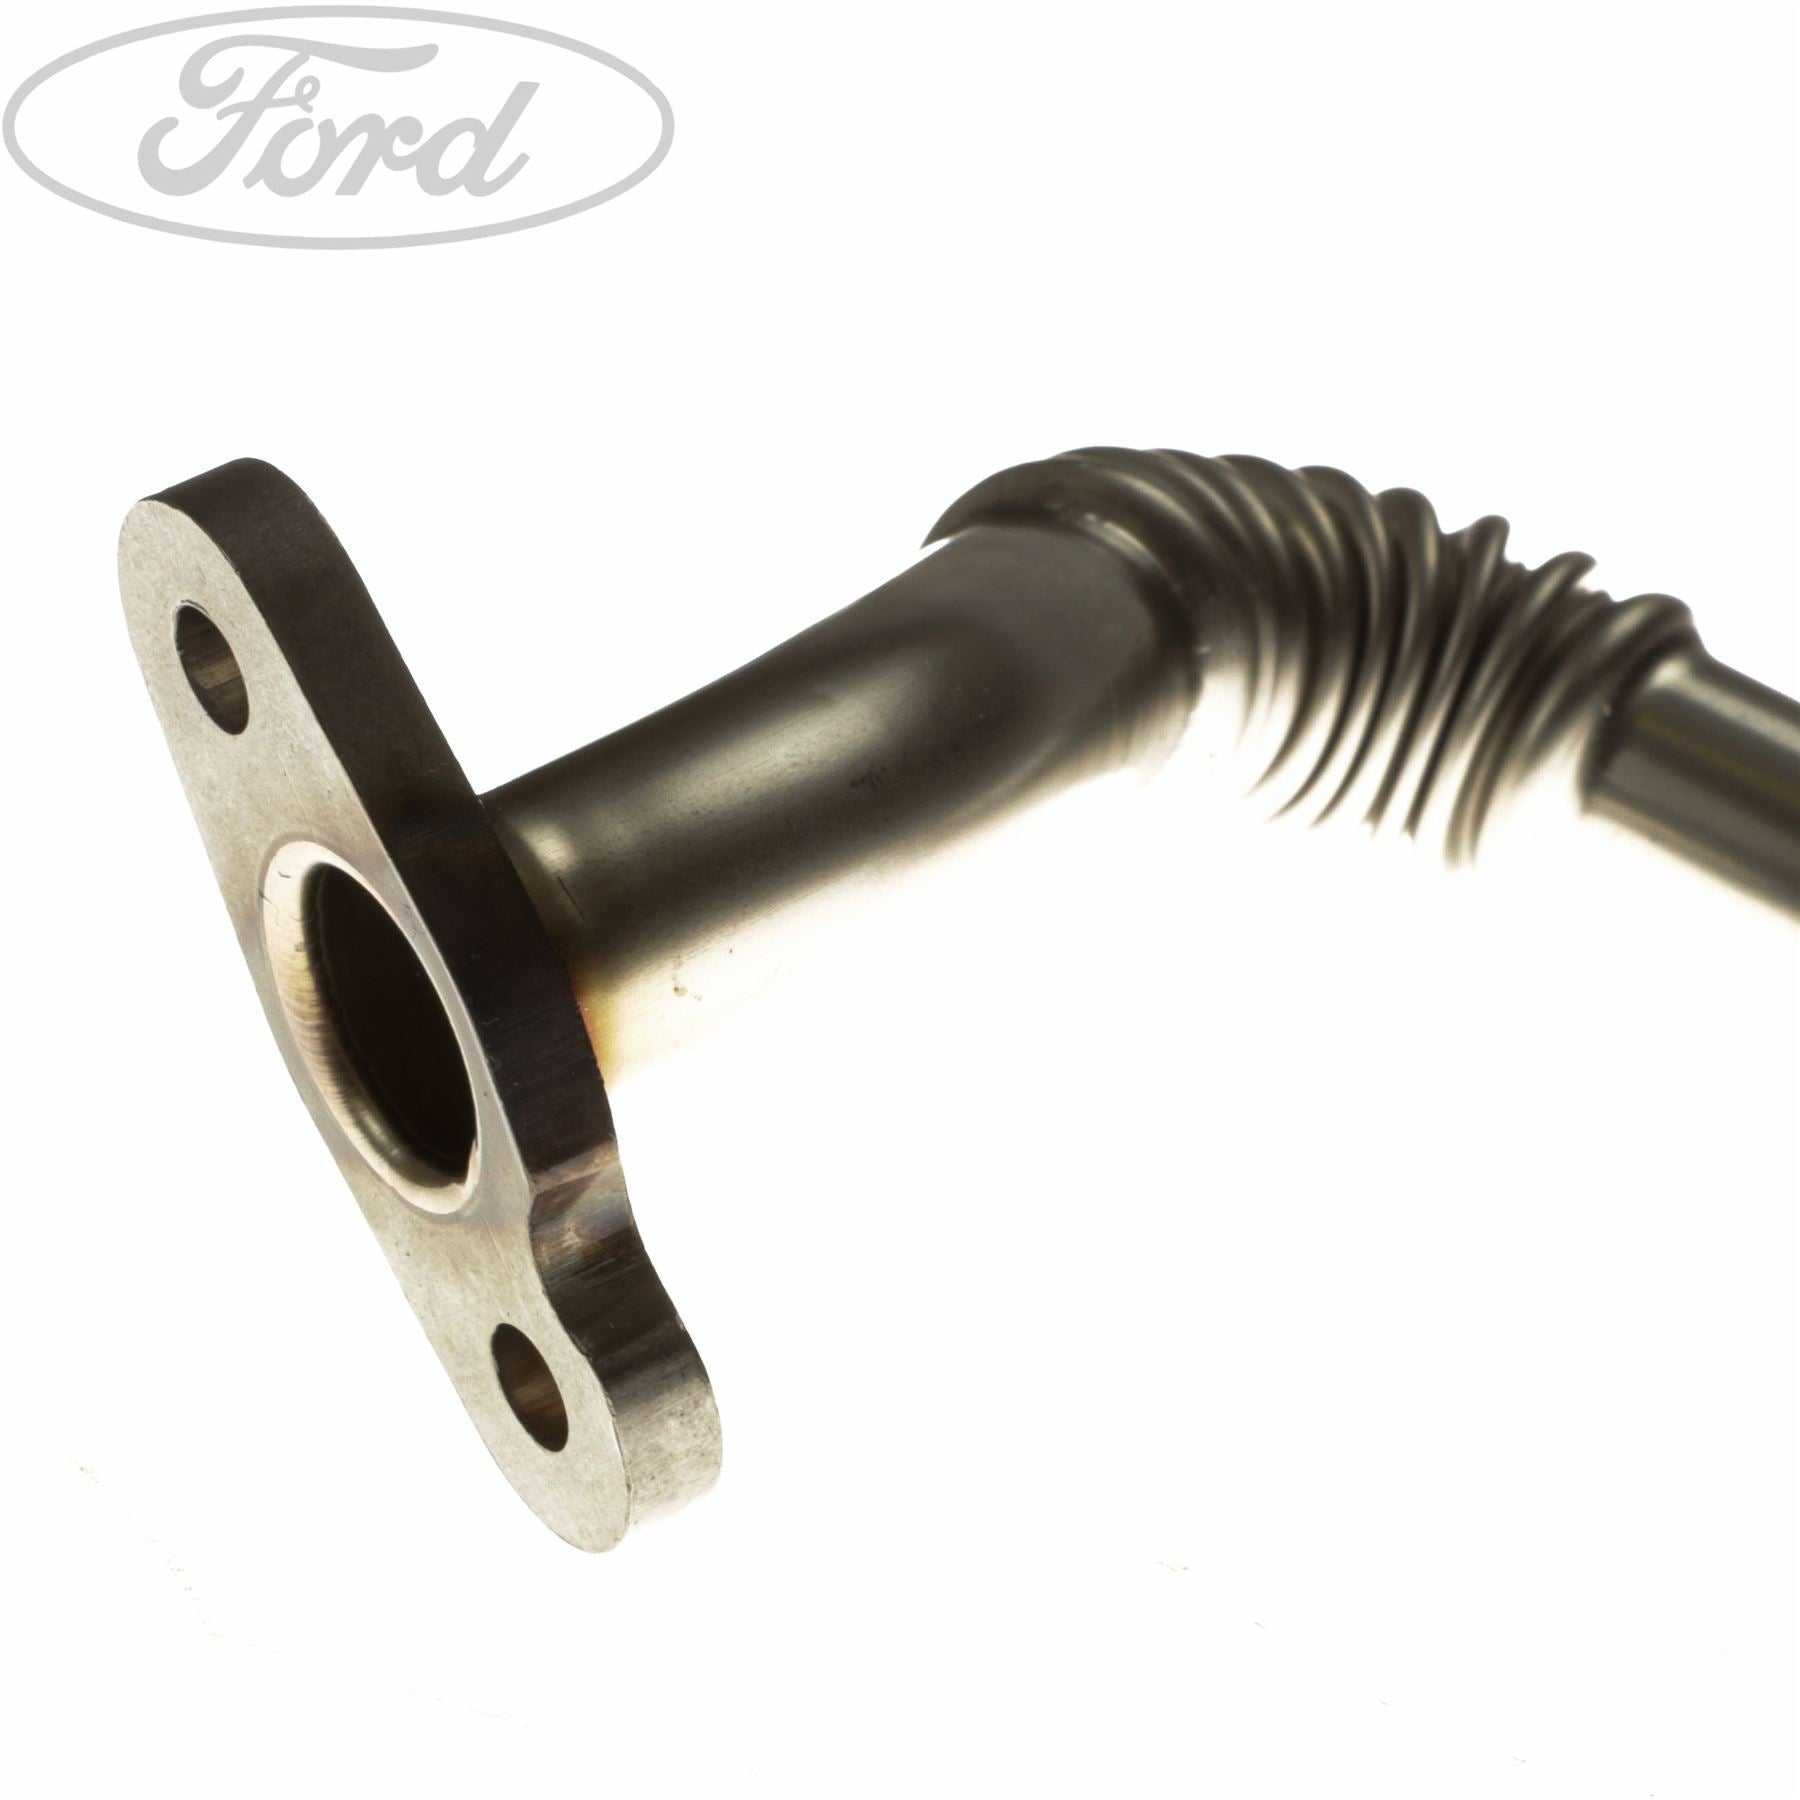 Ford, TRANSIT EXHAUST MANIFOLD OIL DRAIN TUBE